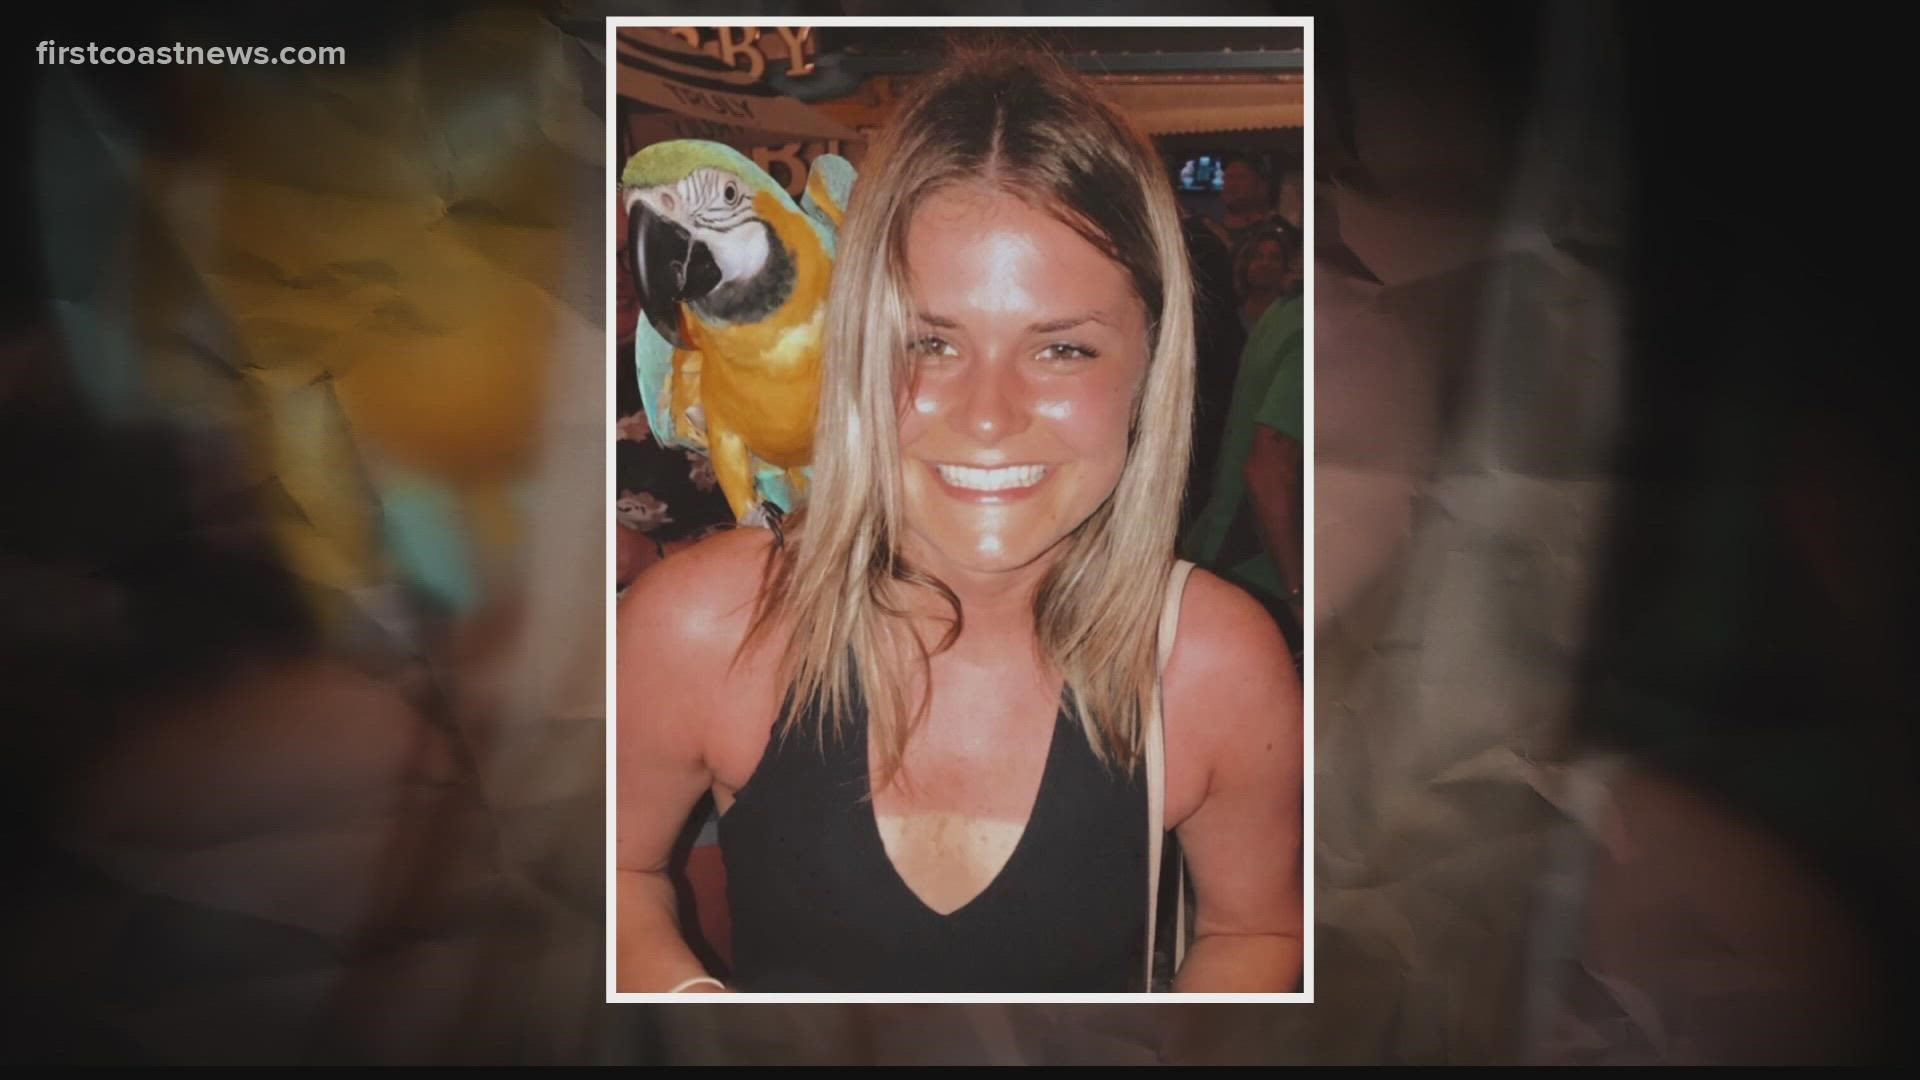 Megan Mooney was a senior at UNF and was a bouncer at a local bar. Bars all over the Jacksonville Beach area bore her name.